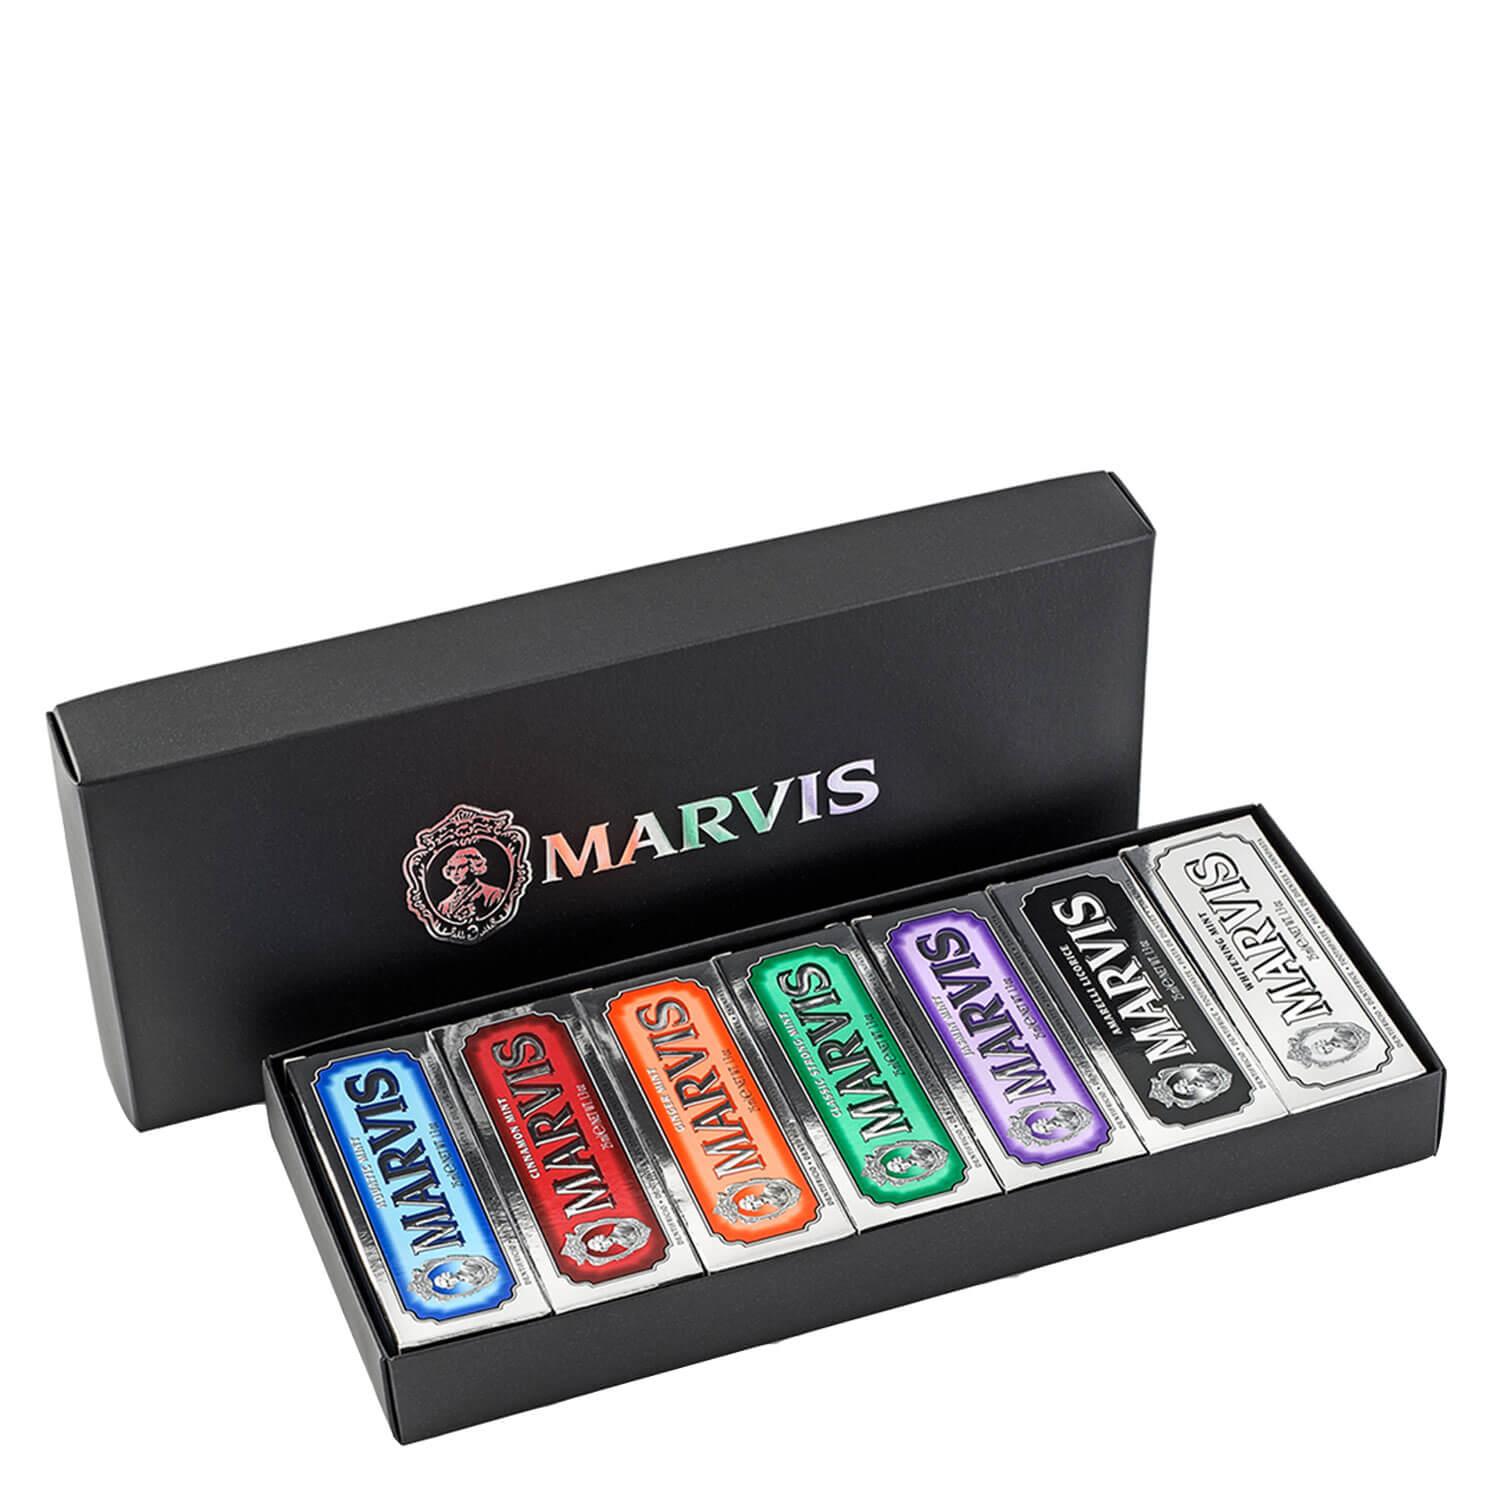 Marvis - 7 Flavours Box